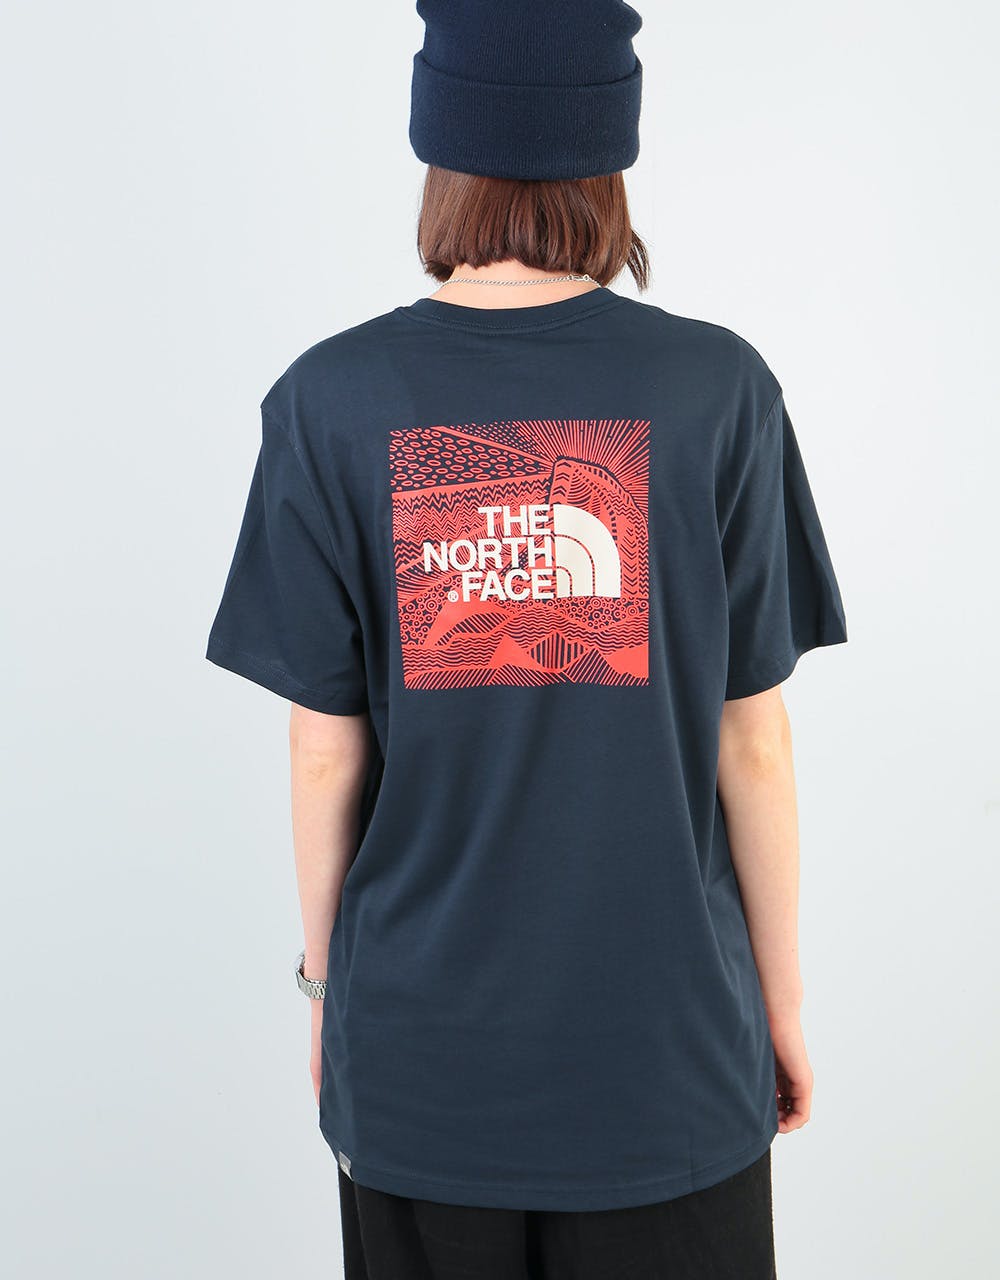 The North Face Womens S/S Redbox Celebration Oversized T-Shirt - Navy